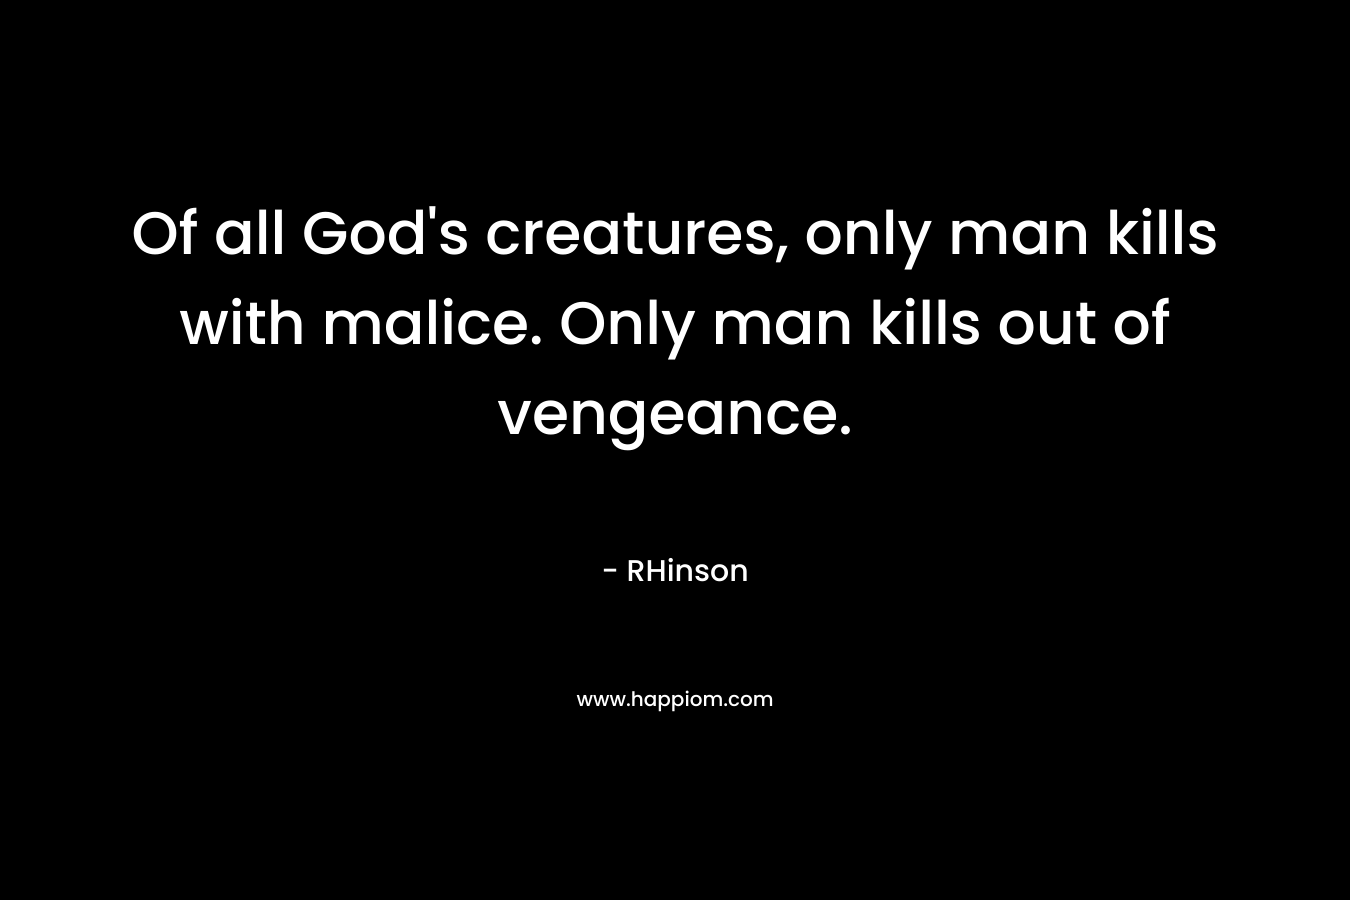 Of all God's creatures, only man kills with malice. Only man kills out of vengeance.